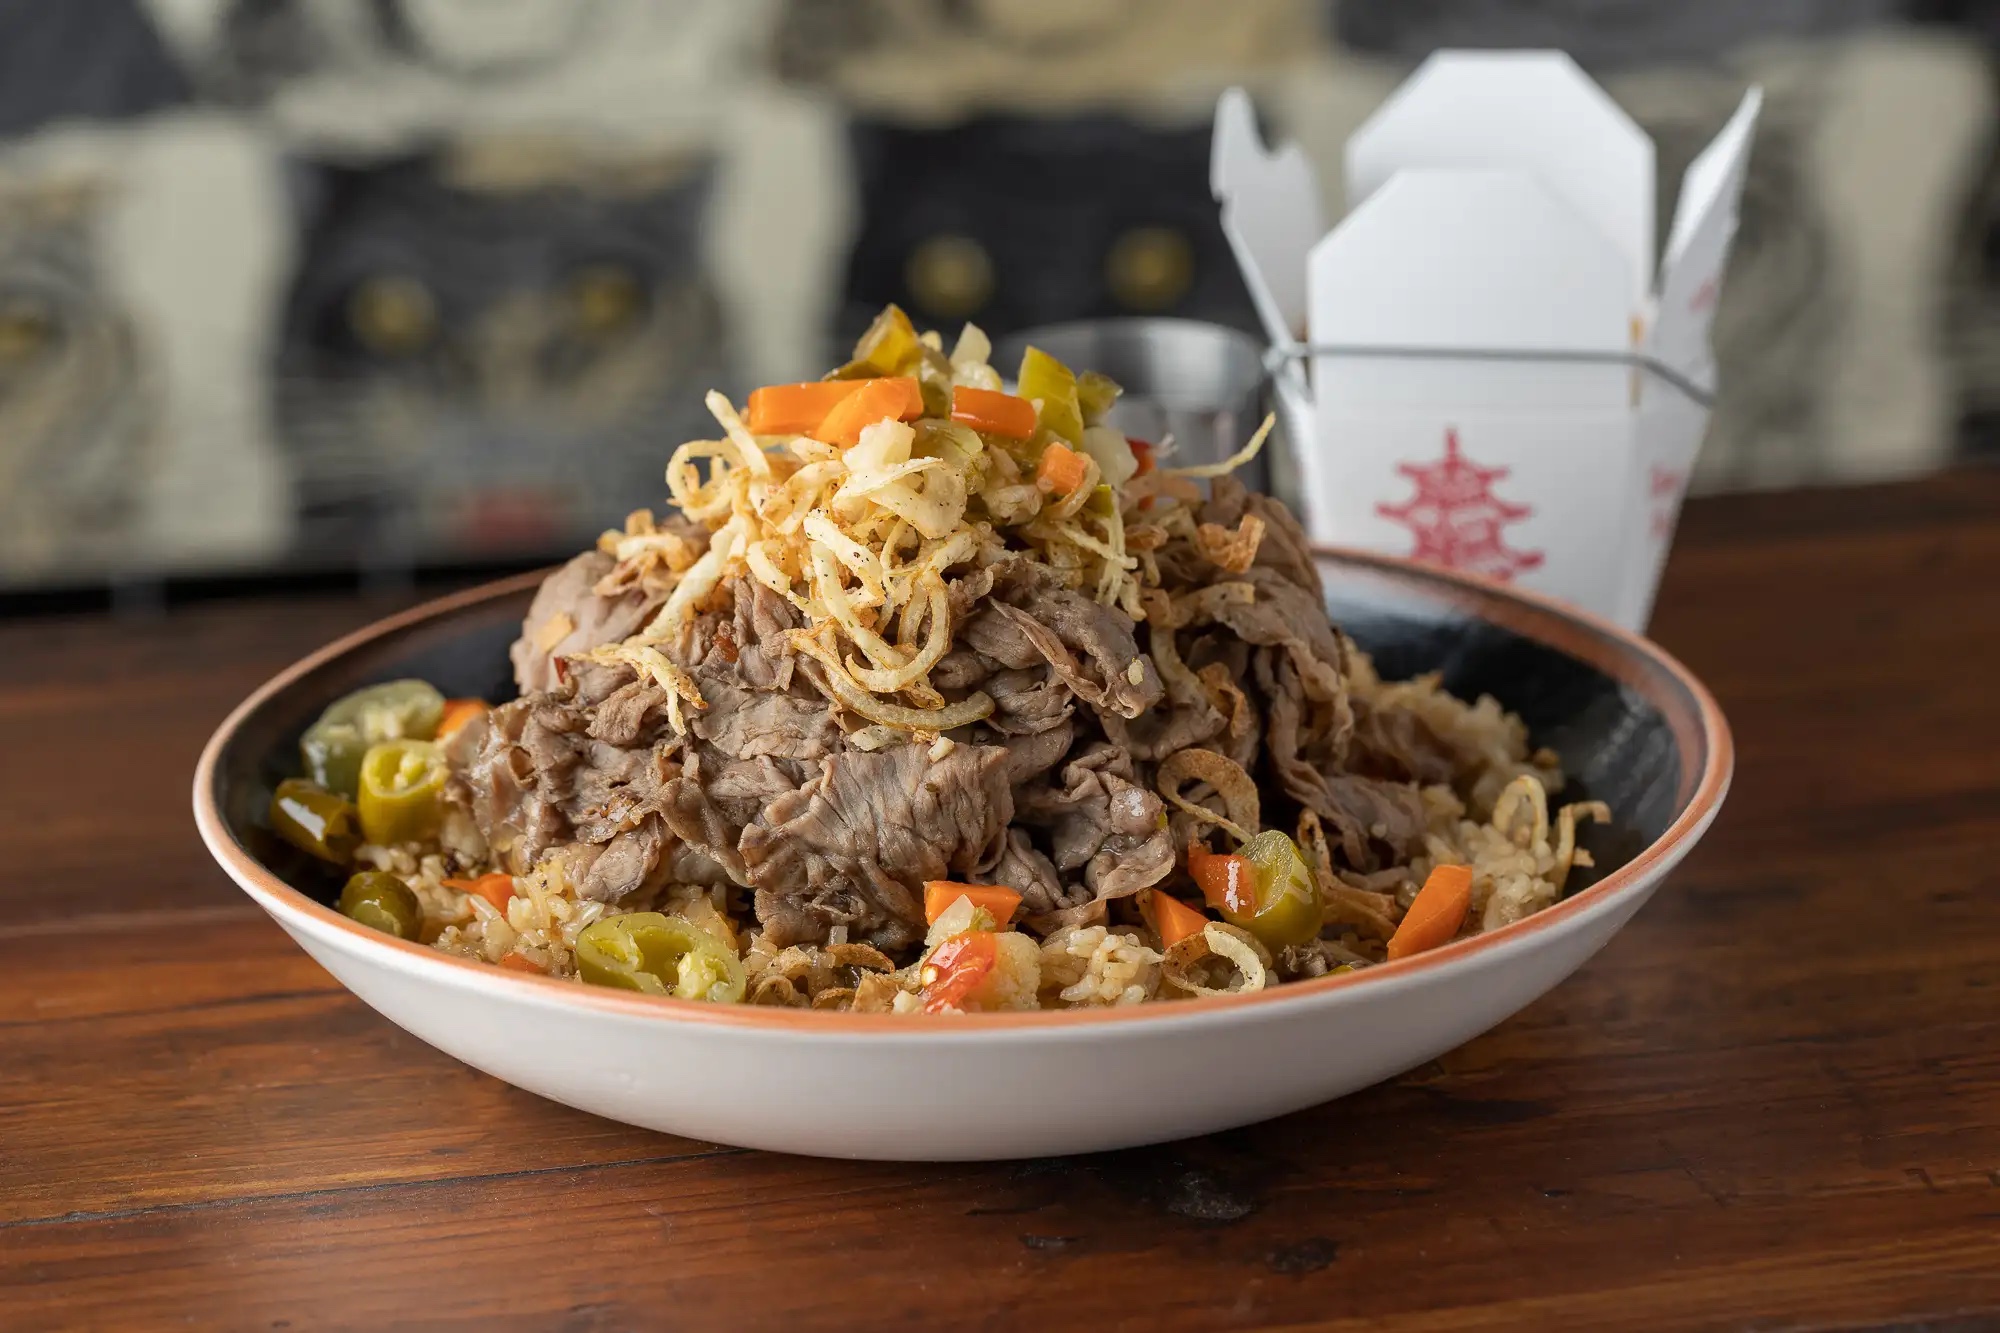 A round white plate holds a large pile of Italian beef fried rice.